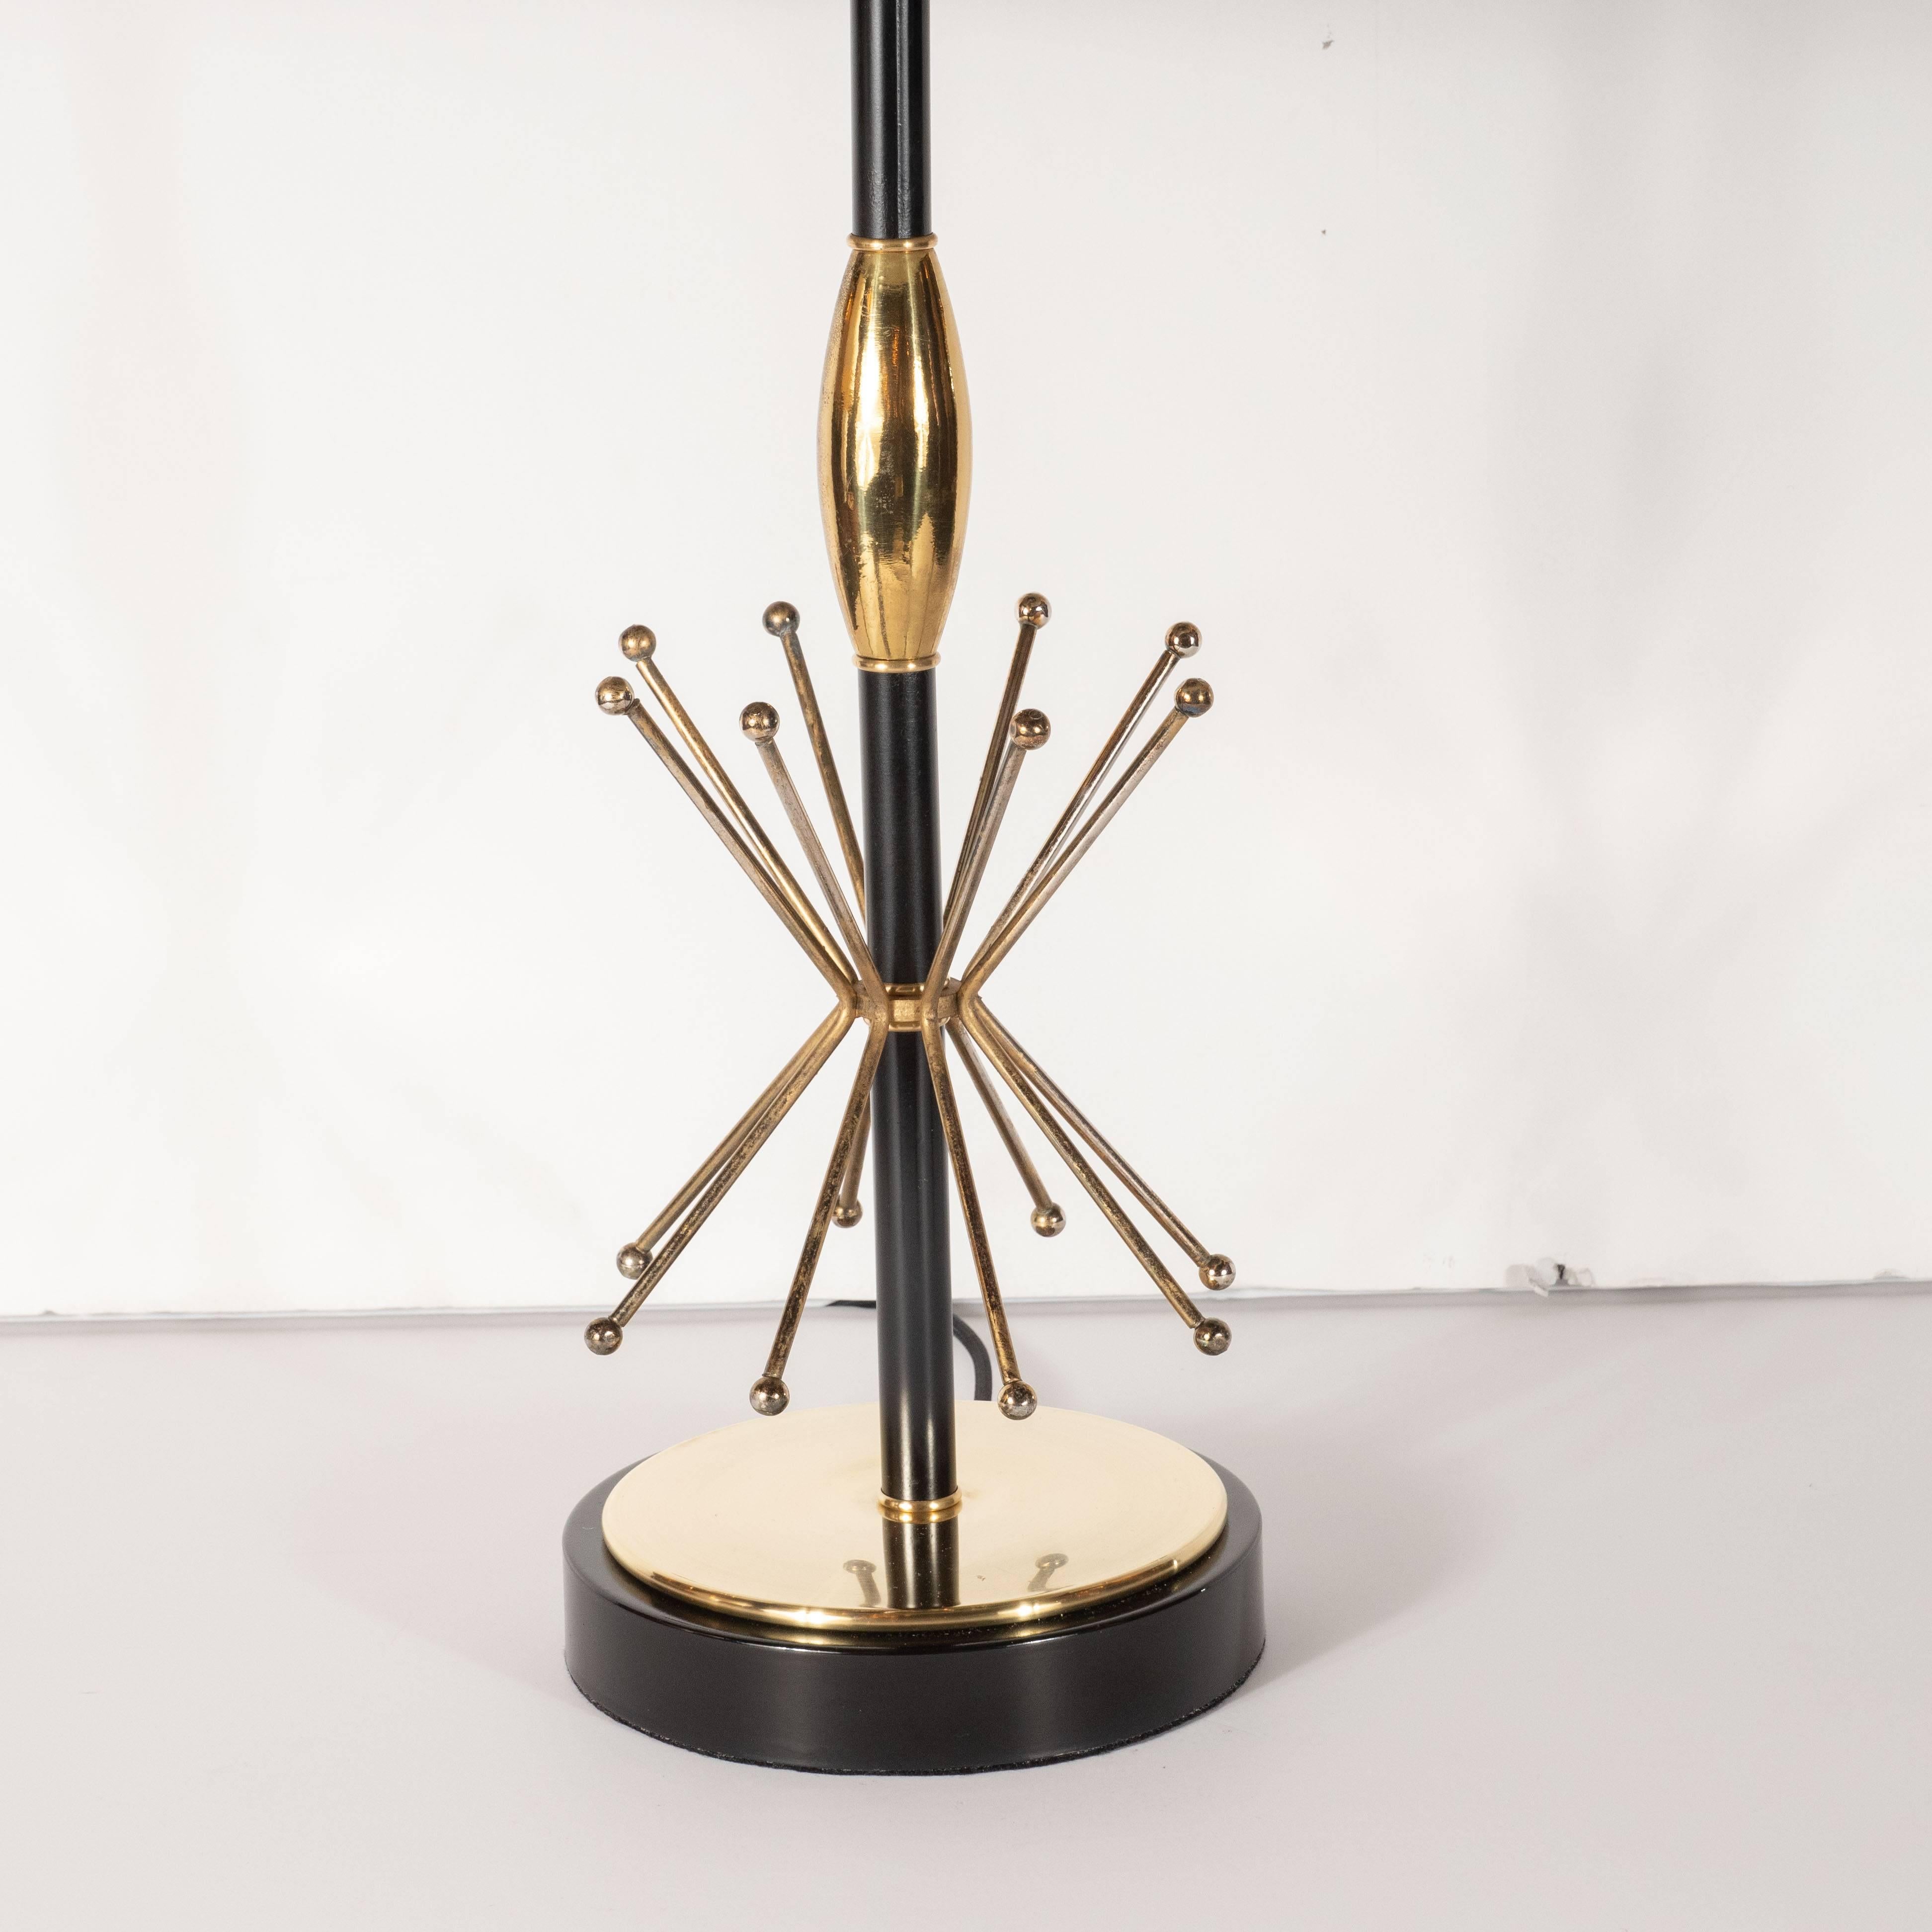 This dramatic and graphic pair of table lamps were realized in the United States, circa 1950. They feature circular black enamel bases with lustrous brass centers. A black enamel rod ascends from the center, wrapped in the middle with a protuberant